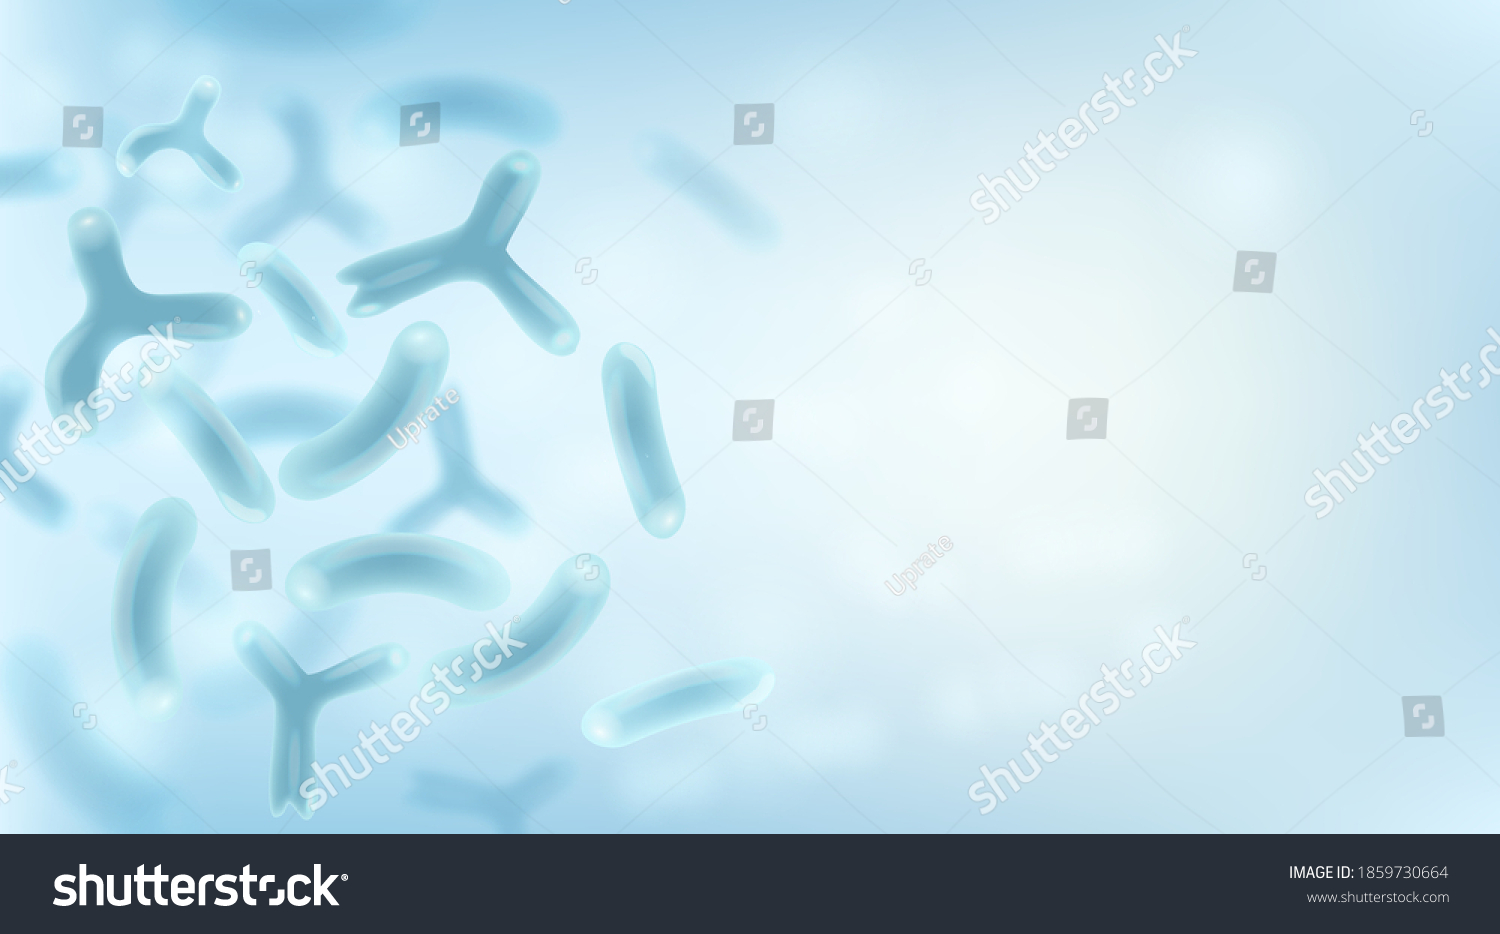 SVG of Microbiology science and medicine background. Bacterias, Probiotic Microscopic microorganisms. Science background.  svg